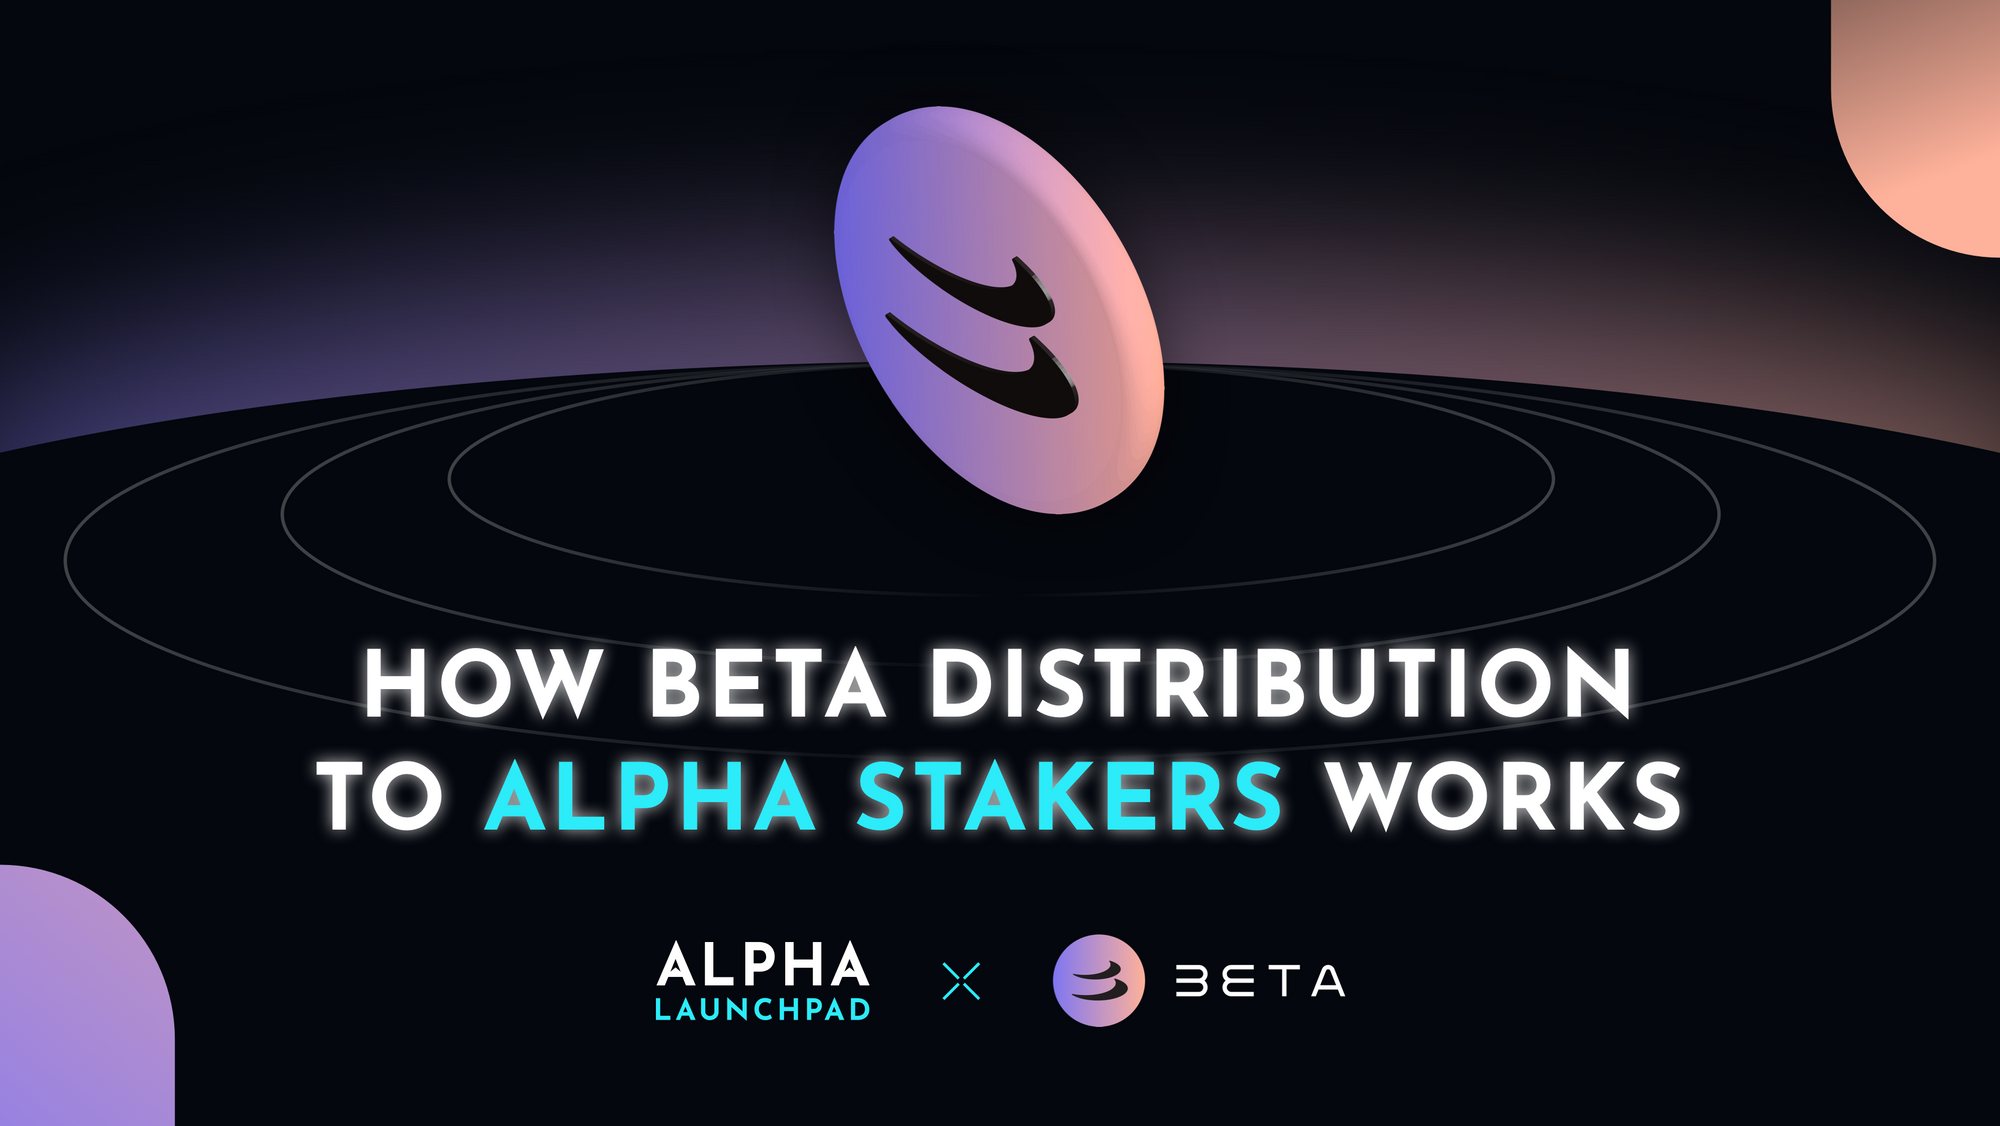 How BETA Distribution To ALPHA Stakers Works